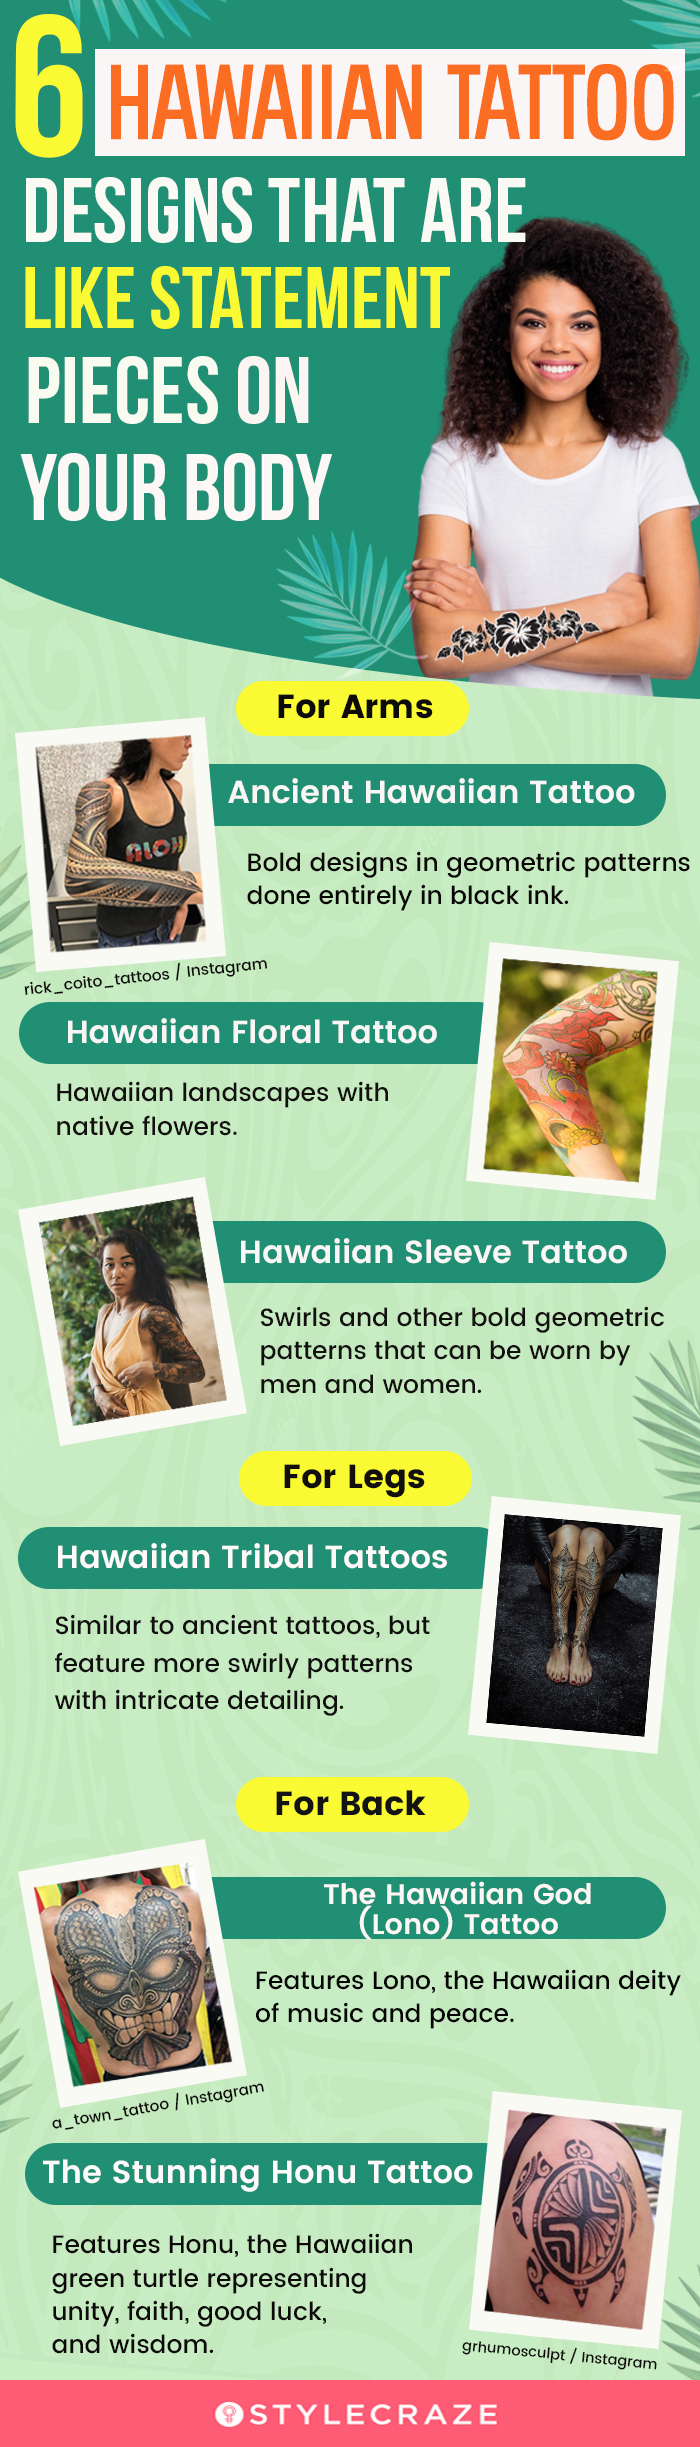 6 hawaiian tattoo designs that are like statement pieces on your body (infographic)